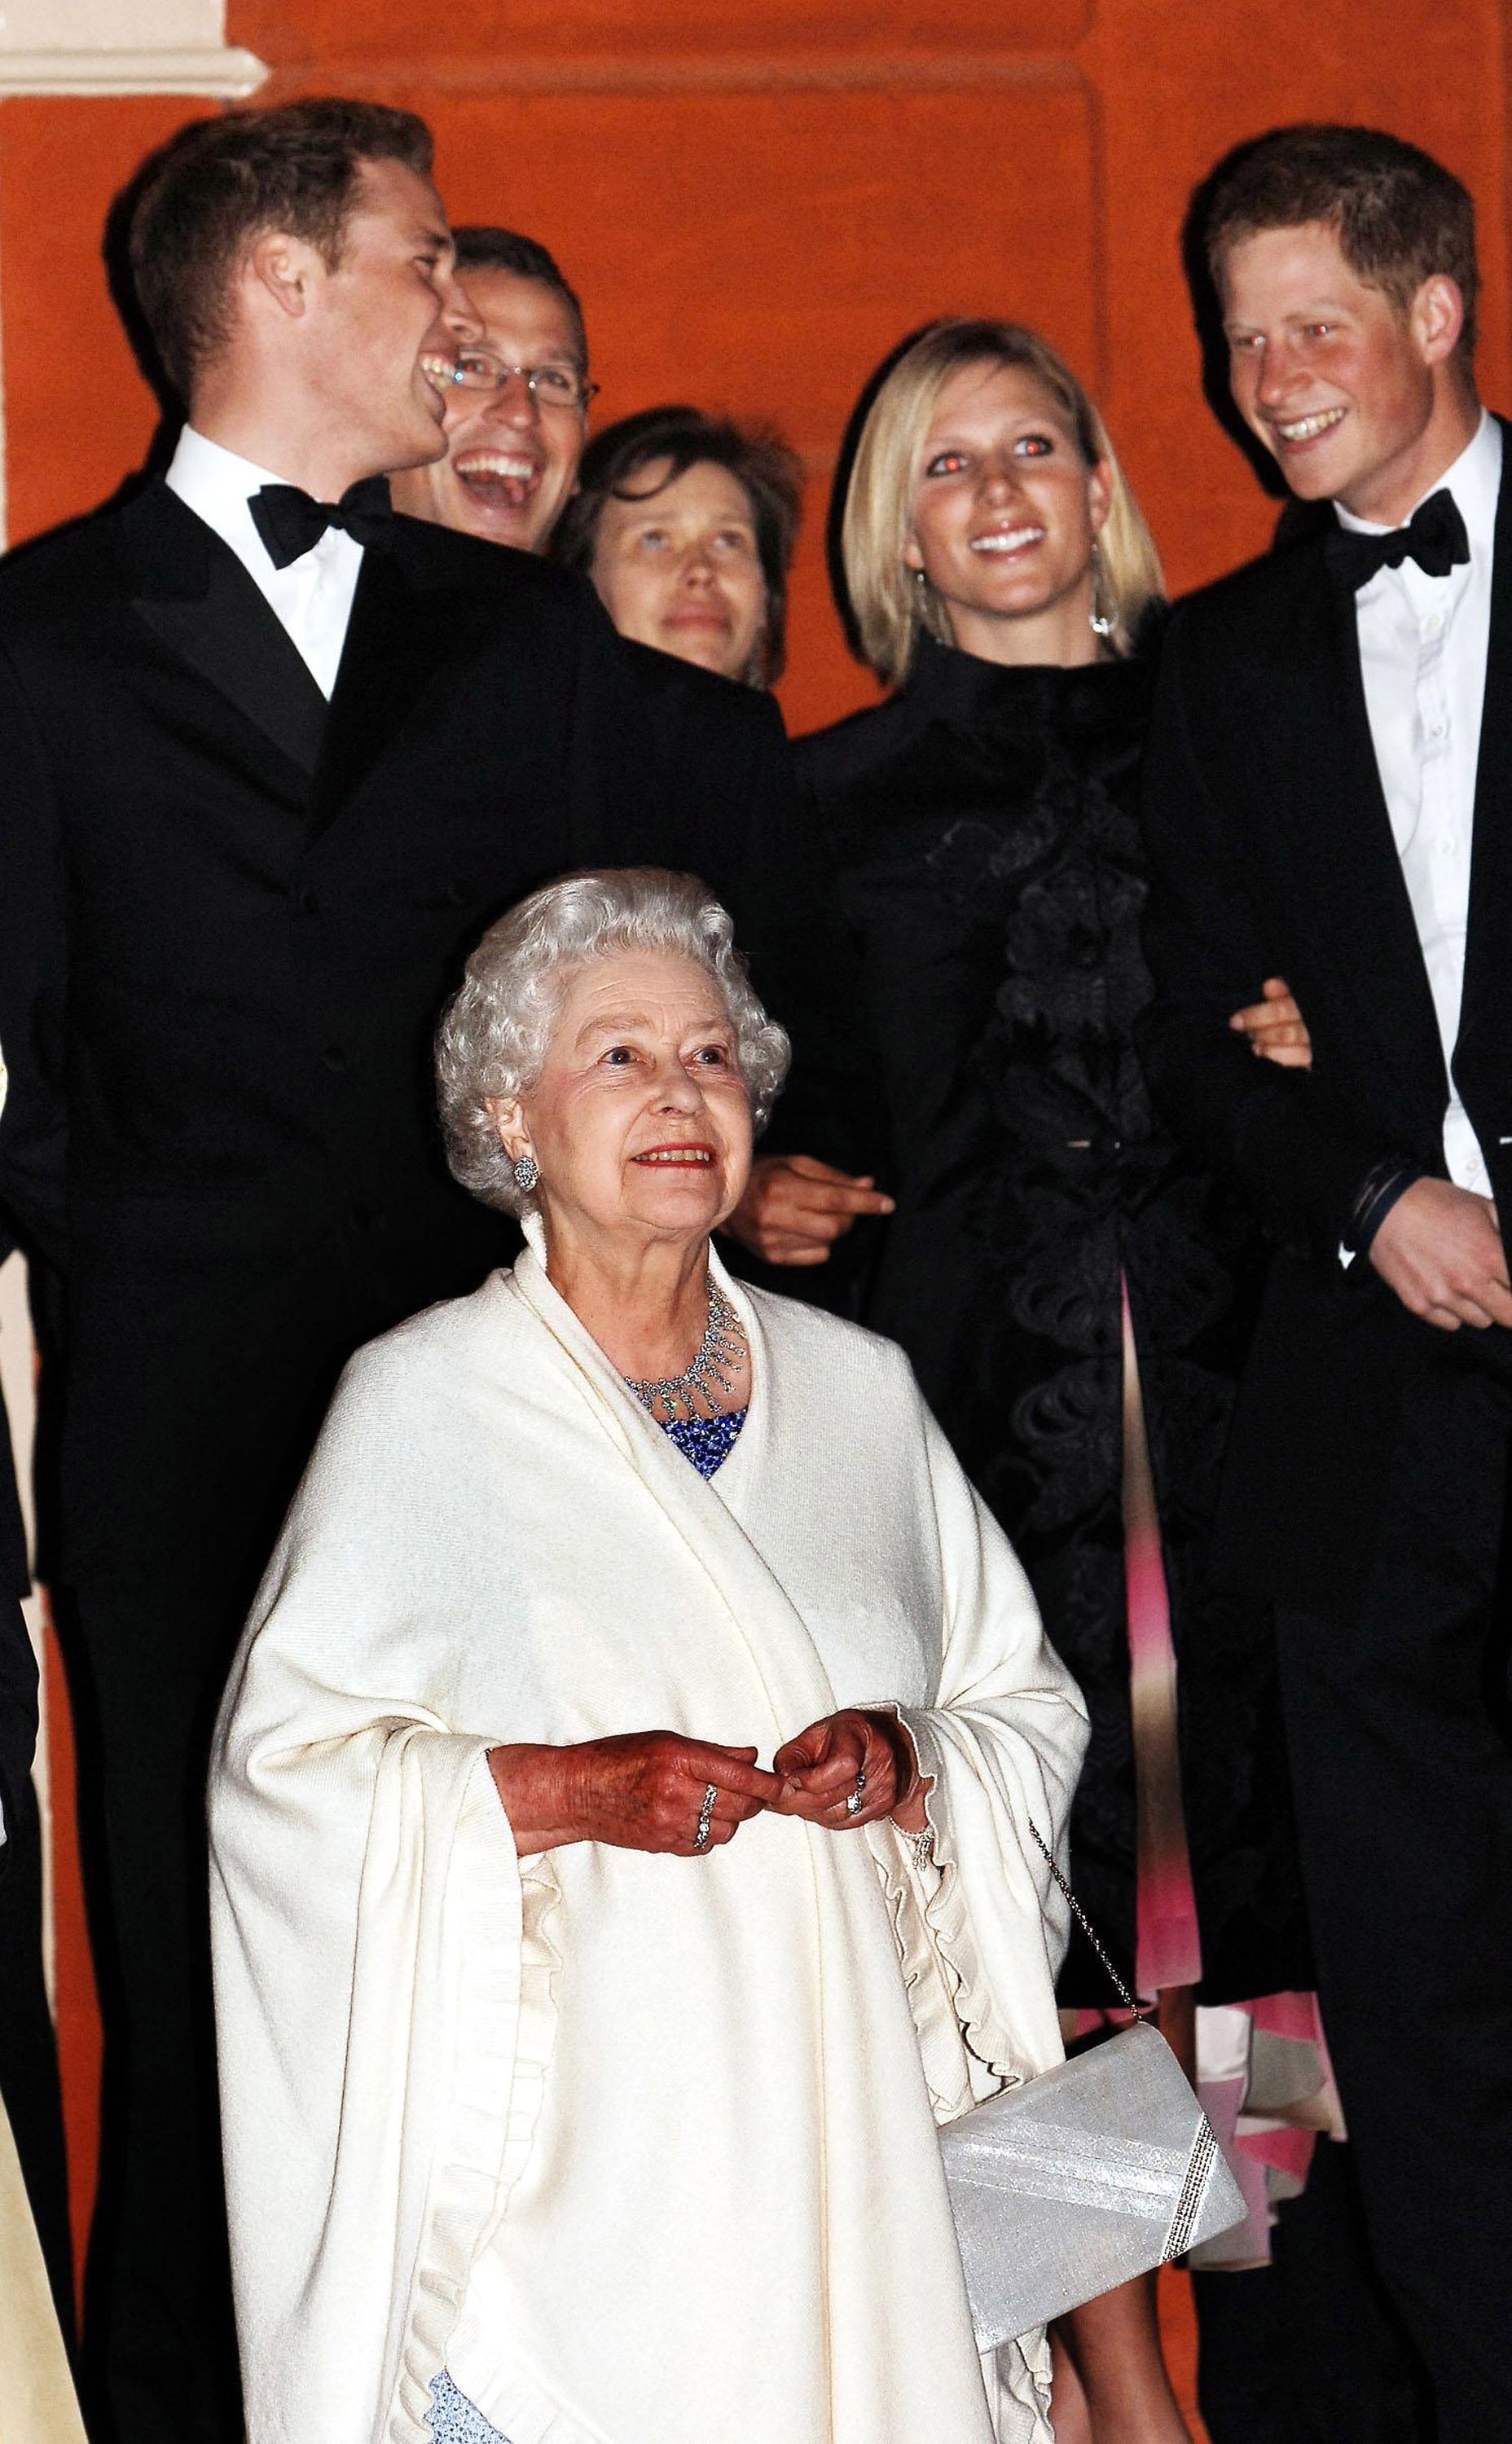 Queen Elizabeth ll watches a firework display while four of her grandchildren, Prince William, Peter Phillips, Zara Phillips and Prince Harry, giggle behind her at Kew Palace in west London, to celebrate the Queen's 80th birthday on April 21, 2006 | Source: Getty Images 